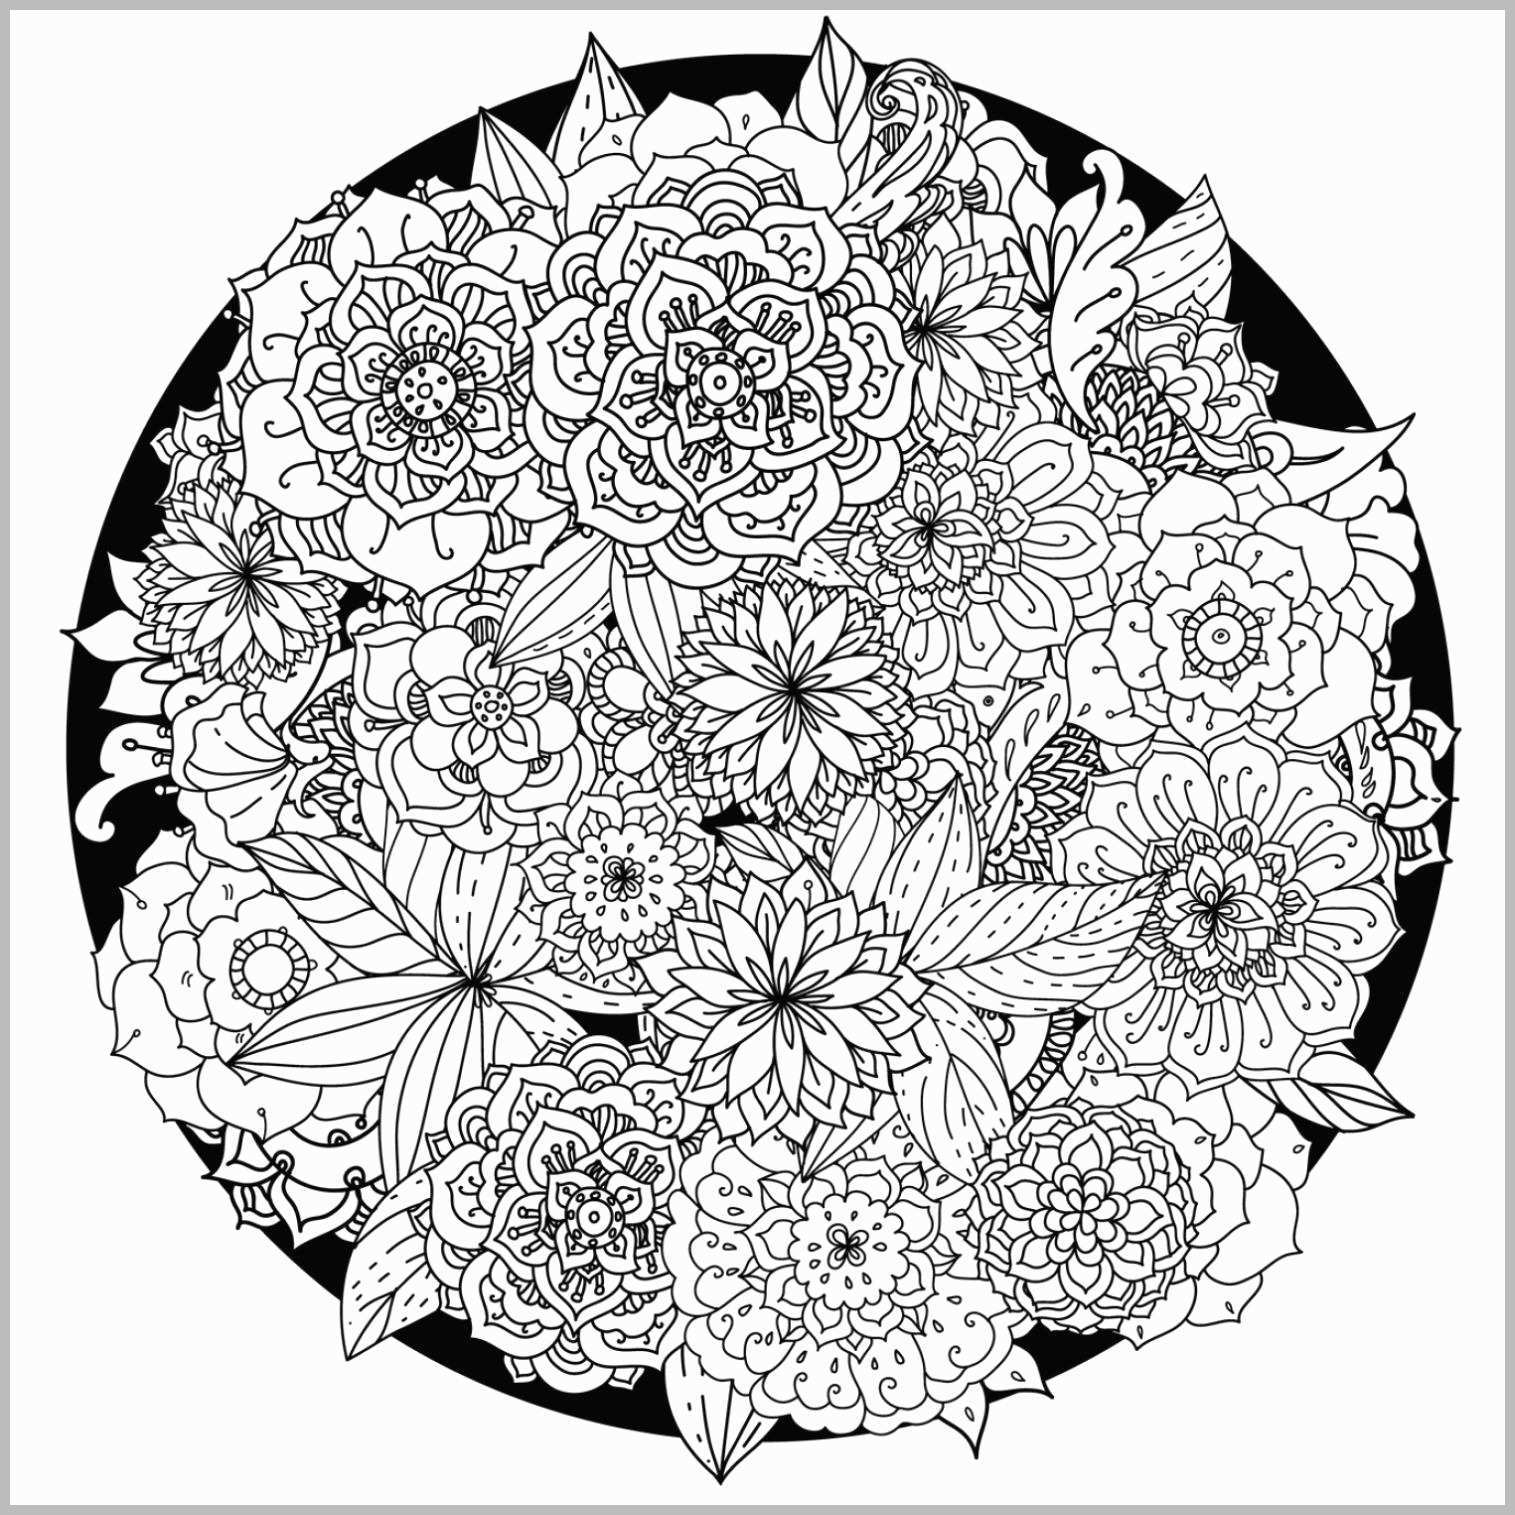 Mandala Coloring Pages For Adults Coloring Pages Mandala Coloringes For Kids With Free Printable